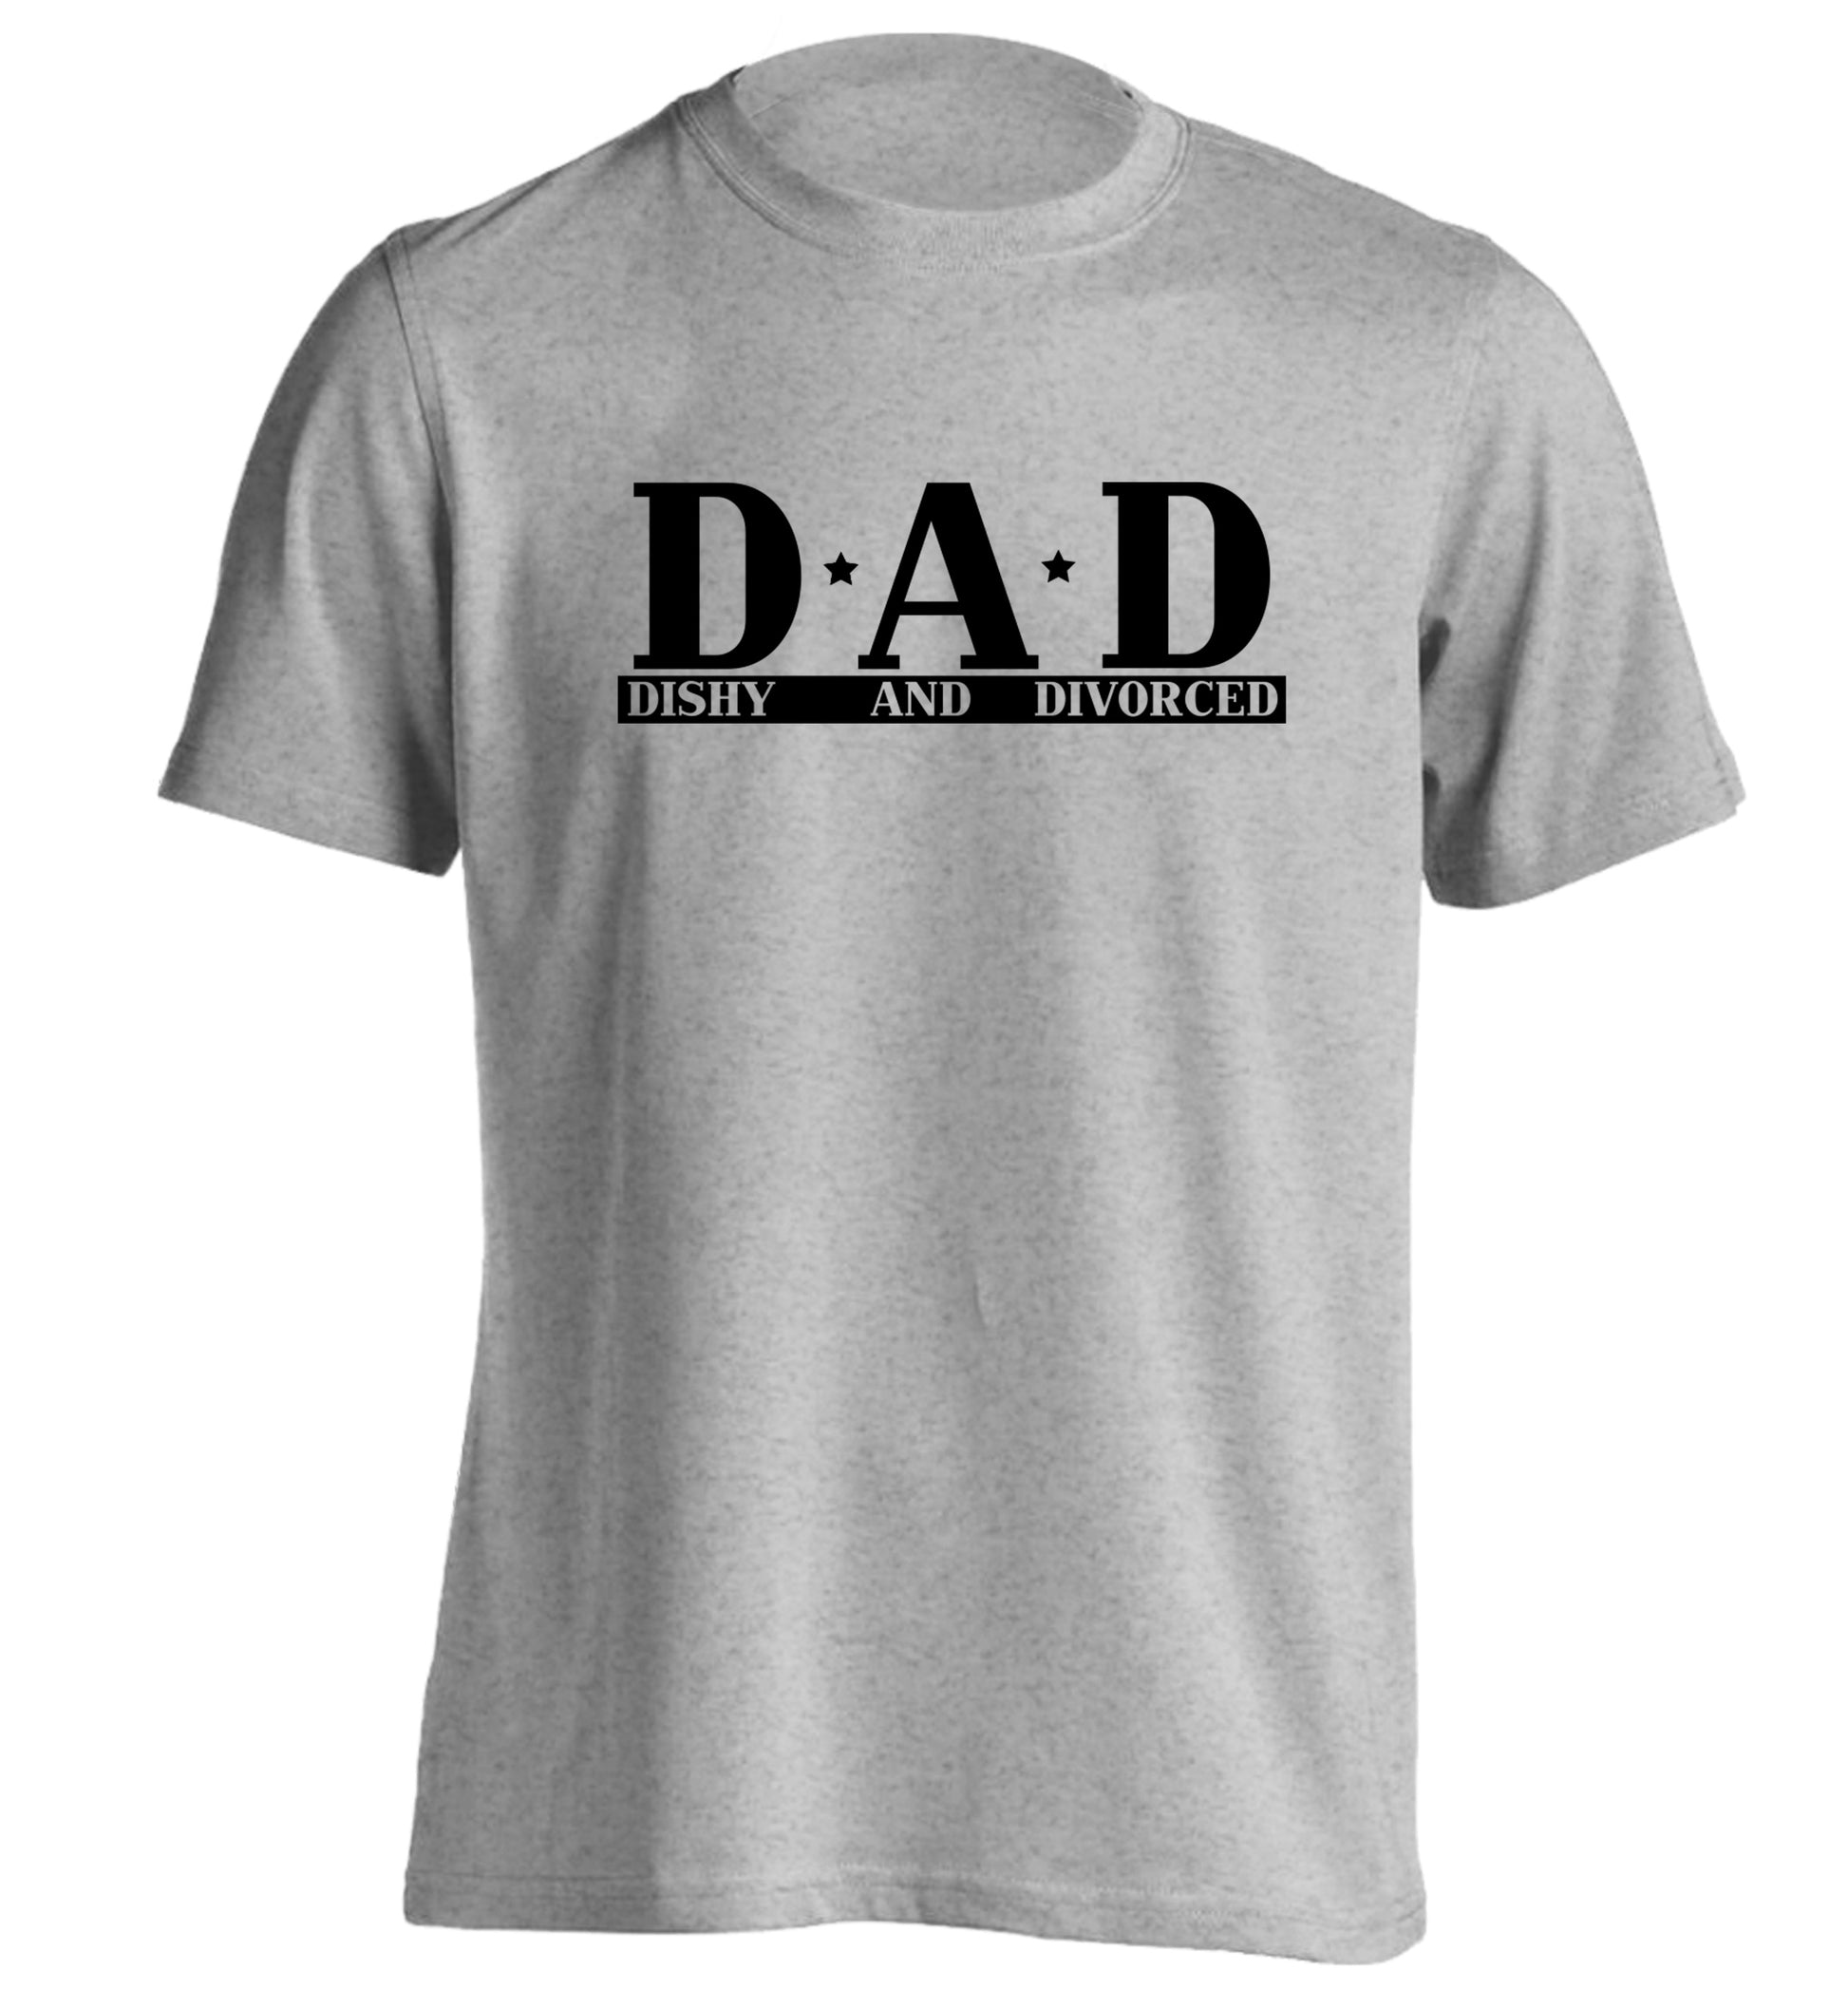 D.A.D meaning Dishy and Divorced adults unisex grey Tshirt 2XL